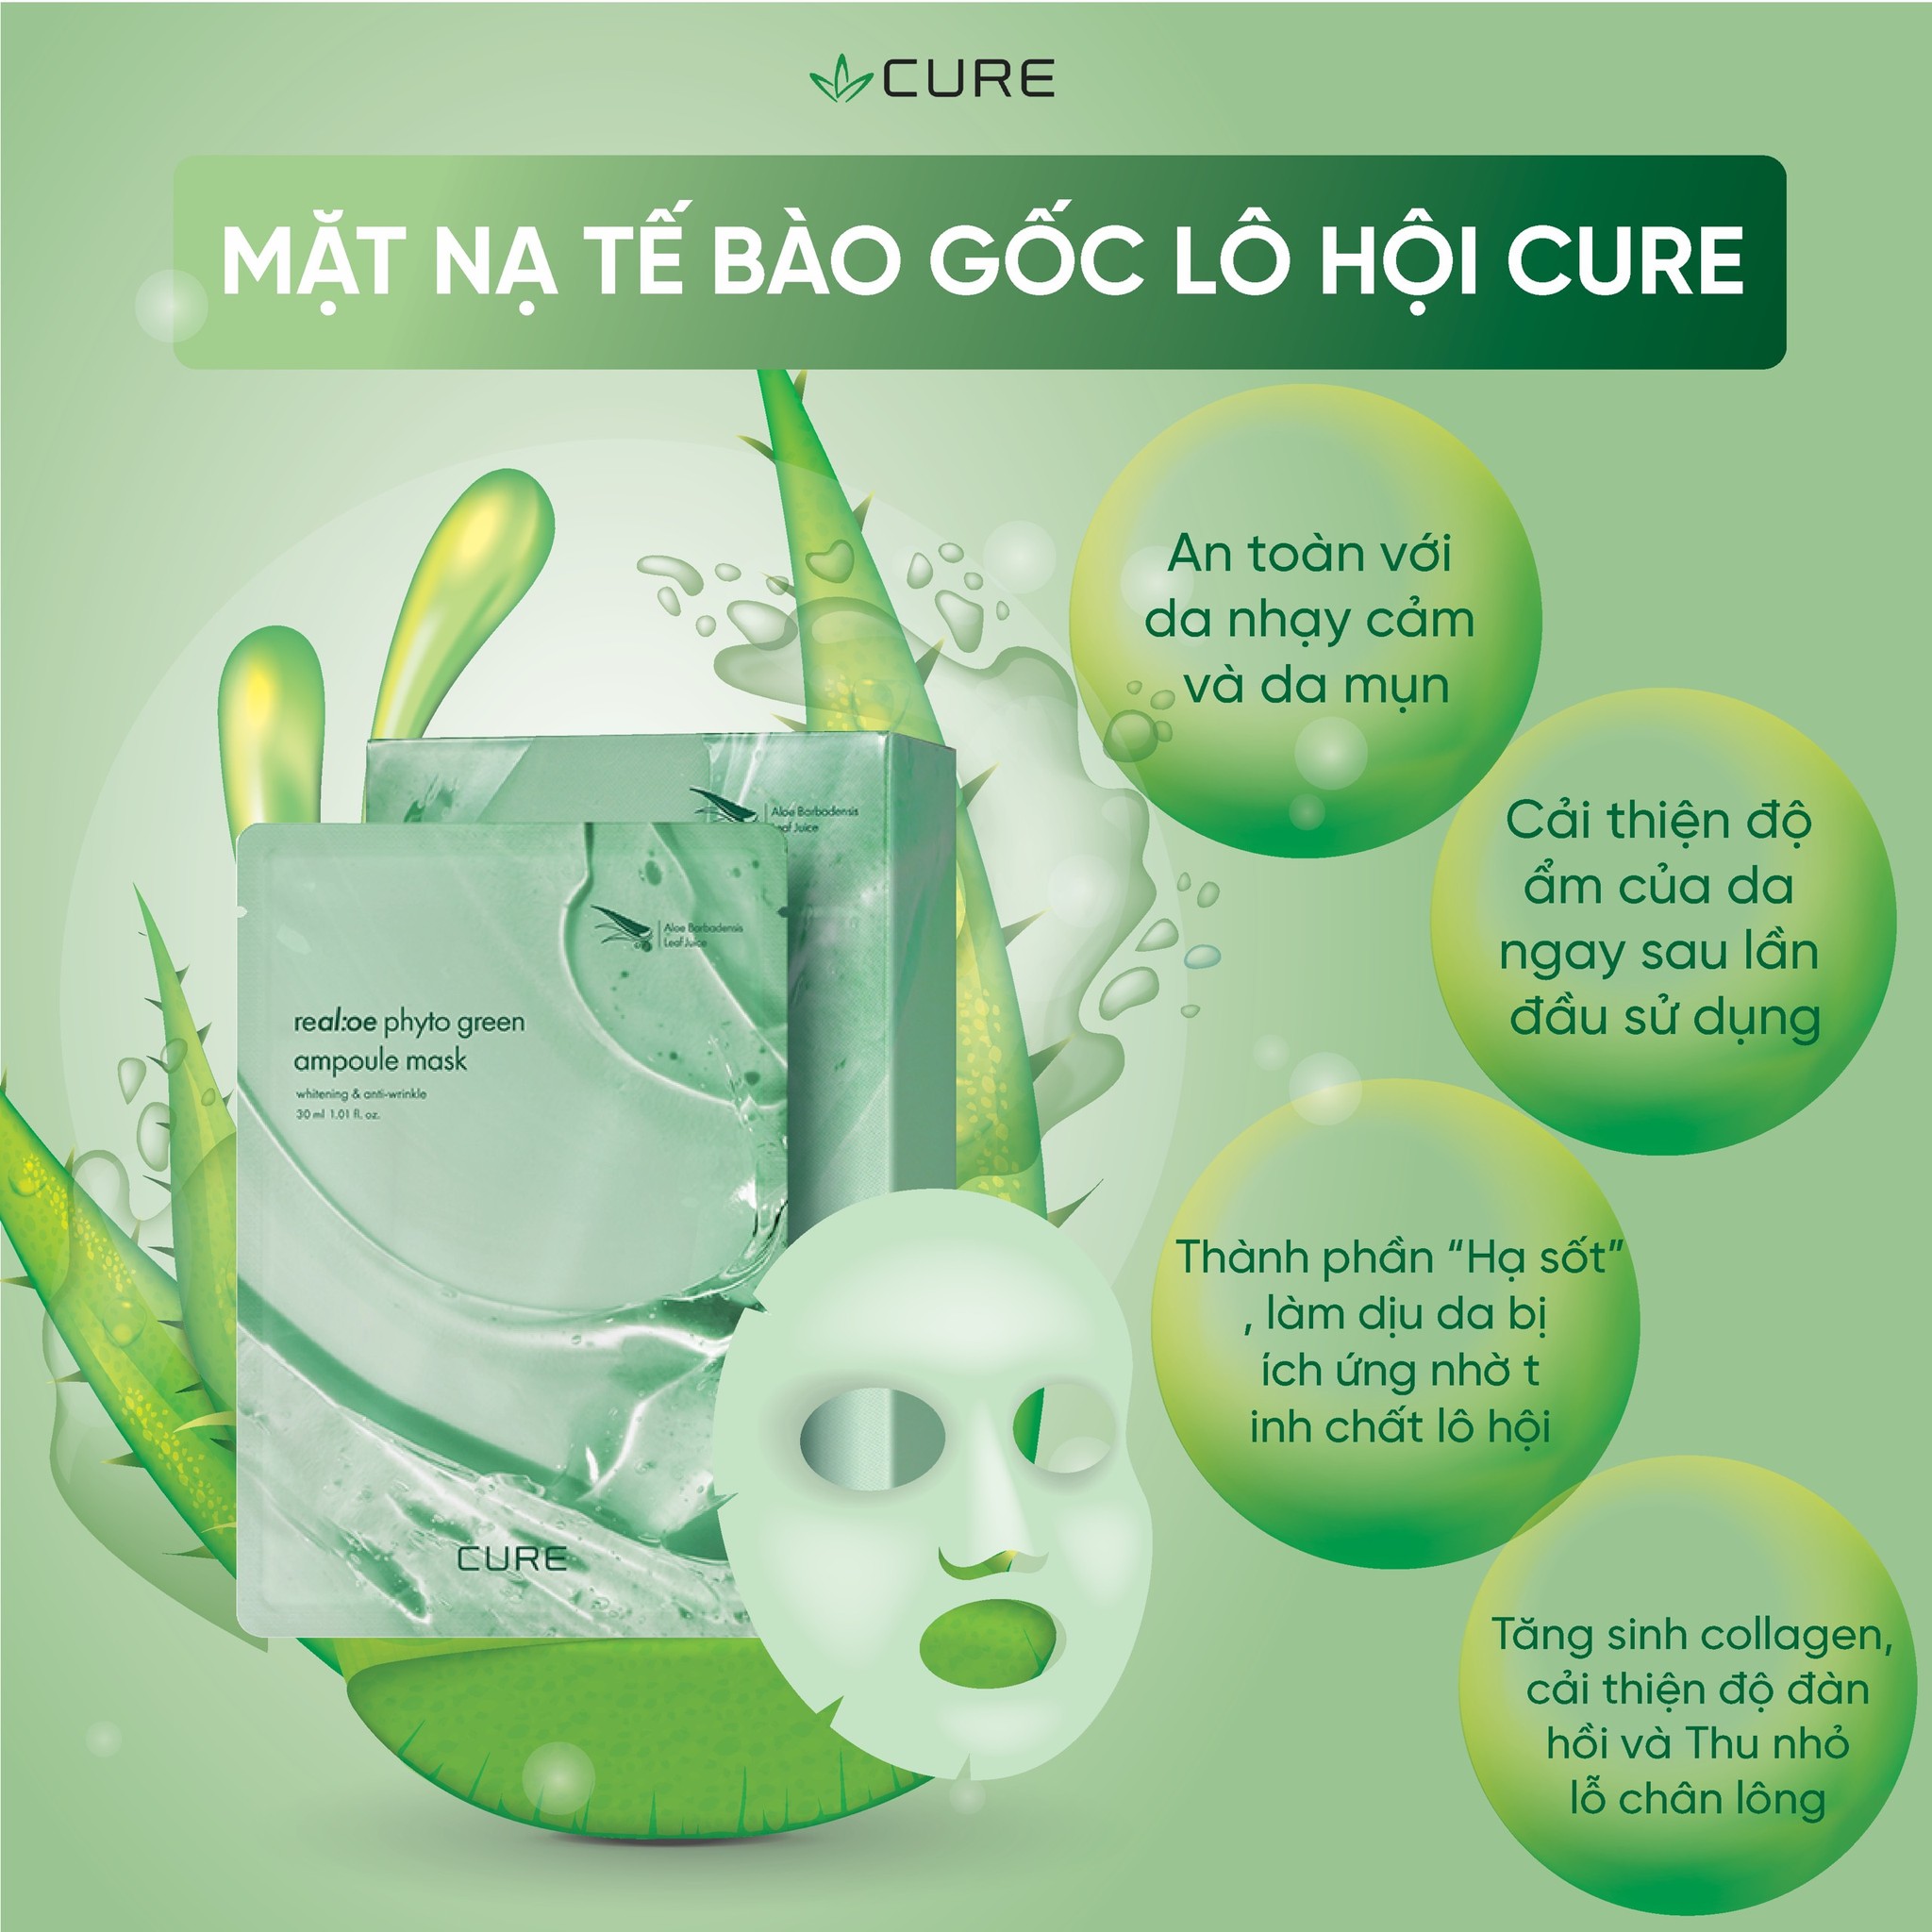 Mặt Nạ Thạch Tế Bào Gốc Lô Hội Cure Real: OE Phyto Green Ampoule Mask